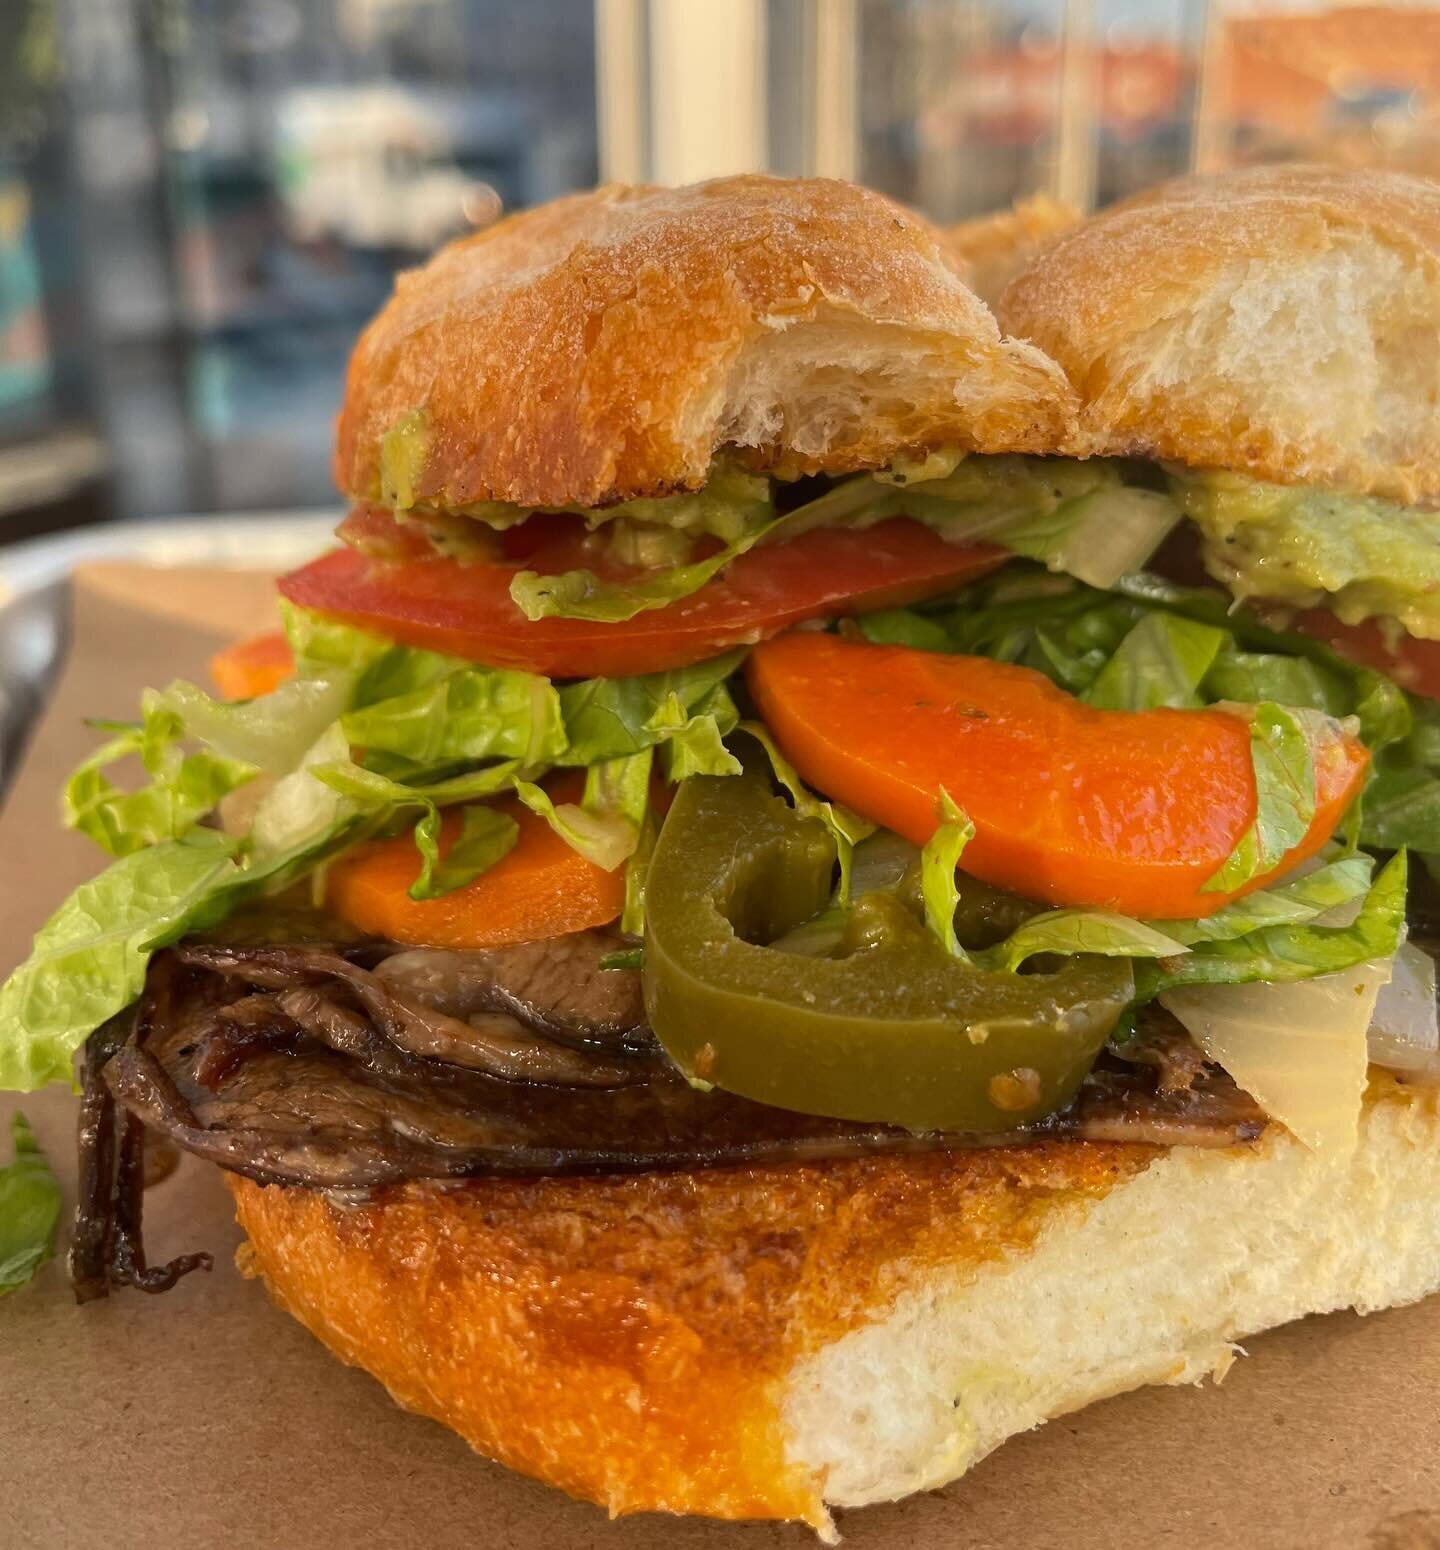 Torta de lengua: sliced &amp; seared beef tongue sandwich with a smear of guac, drizzle of Chipotle mayo, lettuce, tomato &amp; our mix of pickled vegetables, also known as escabeche. This will be our last weekend running this sandwich @porticobrewin